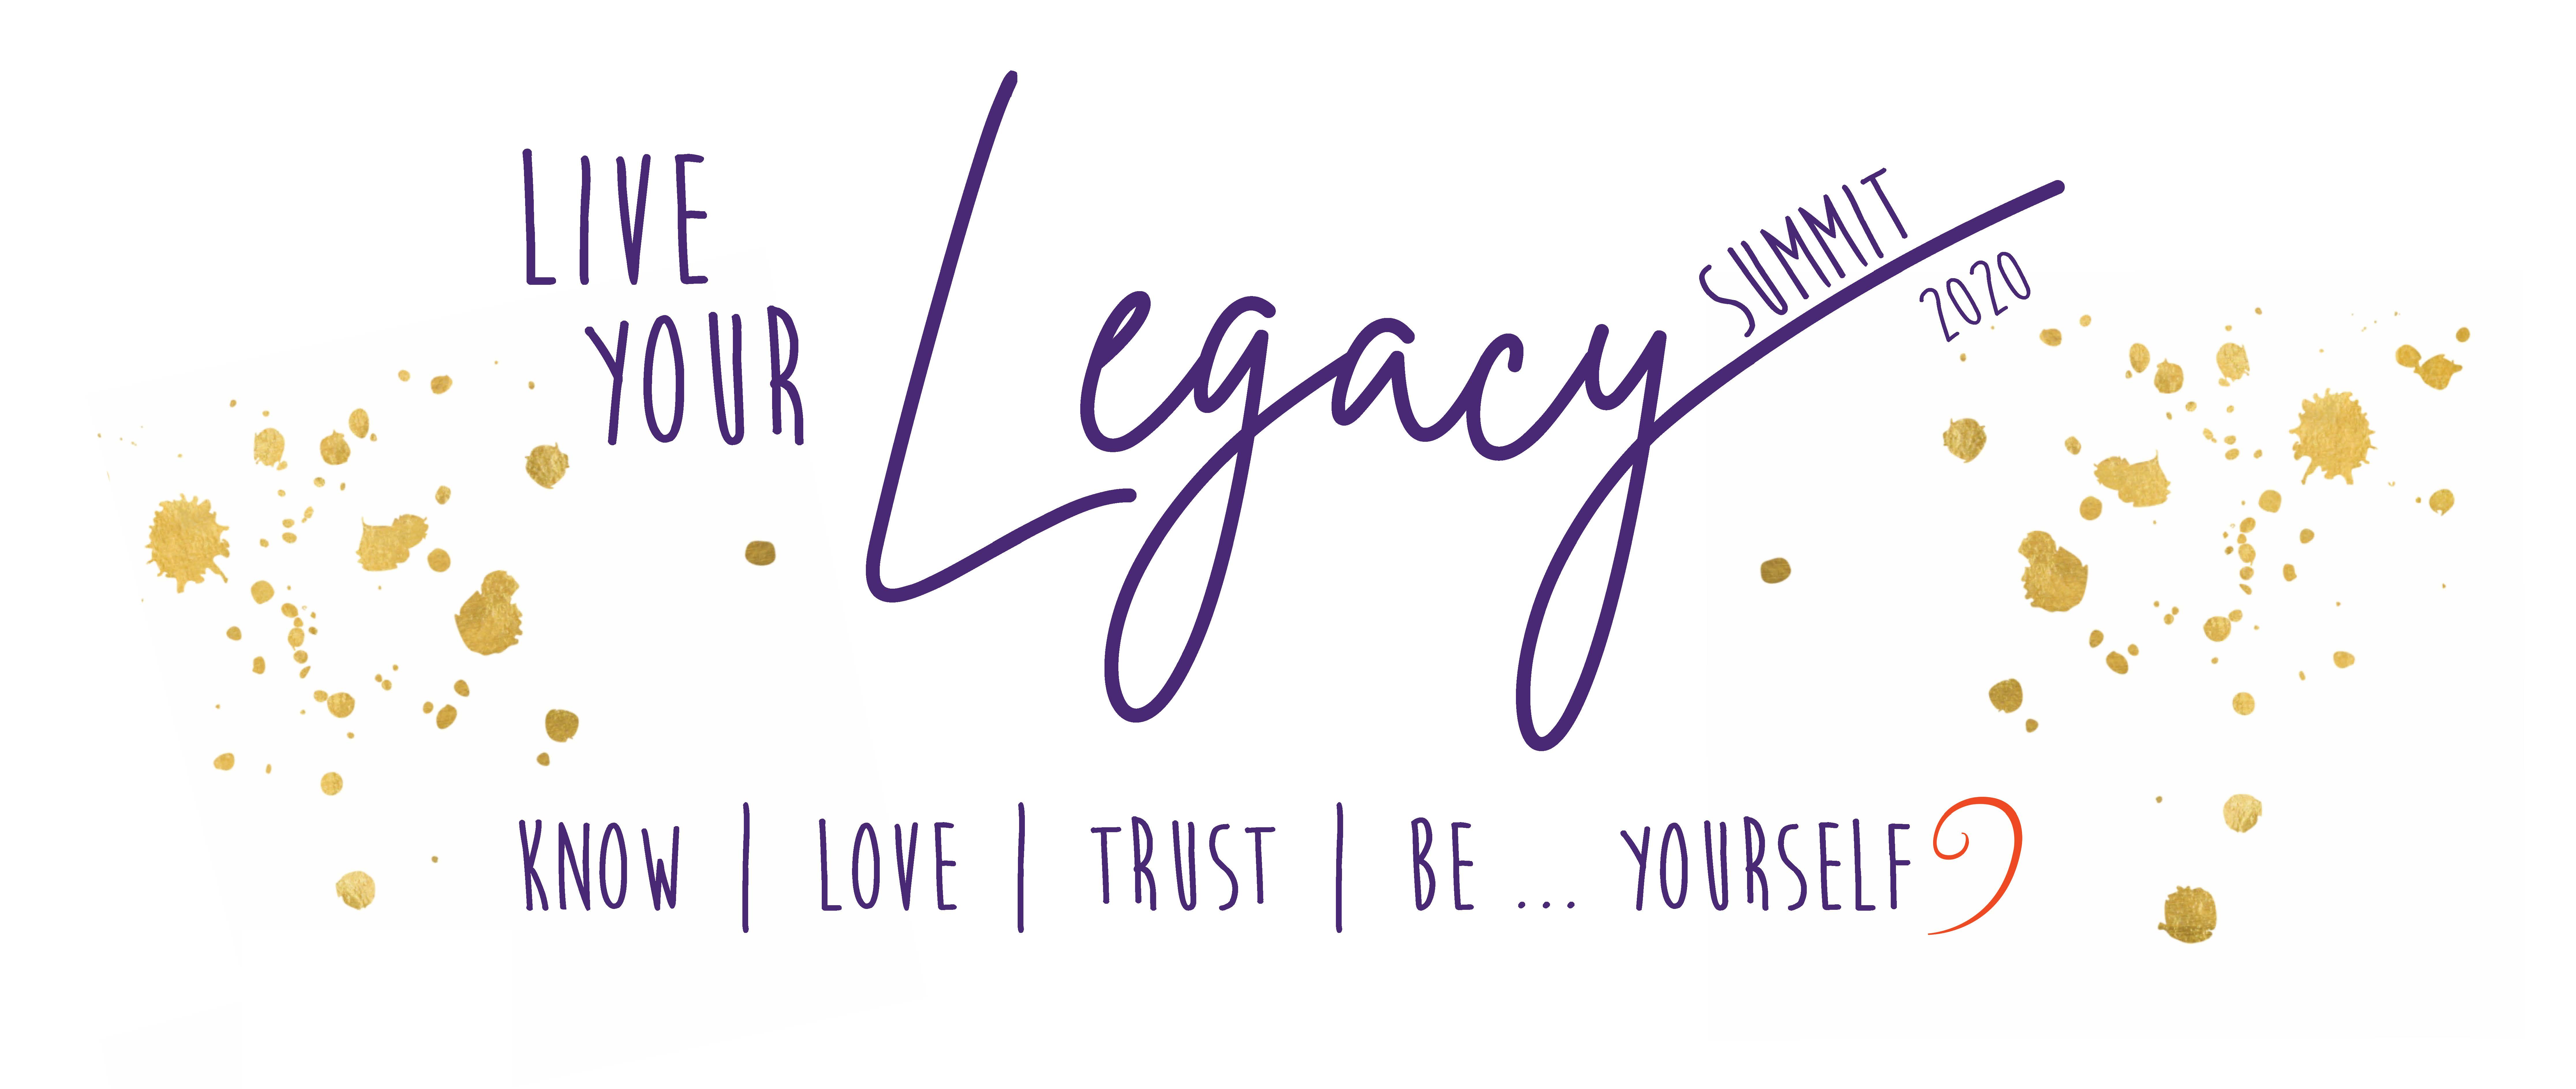 Live your Legacy Image